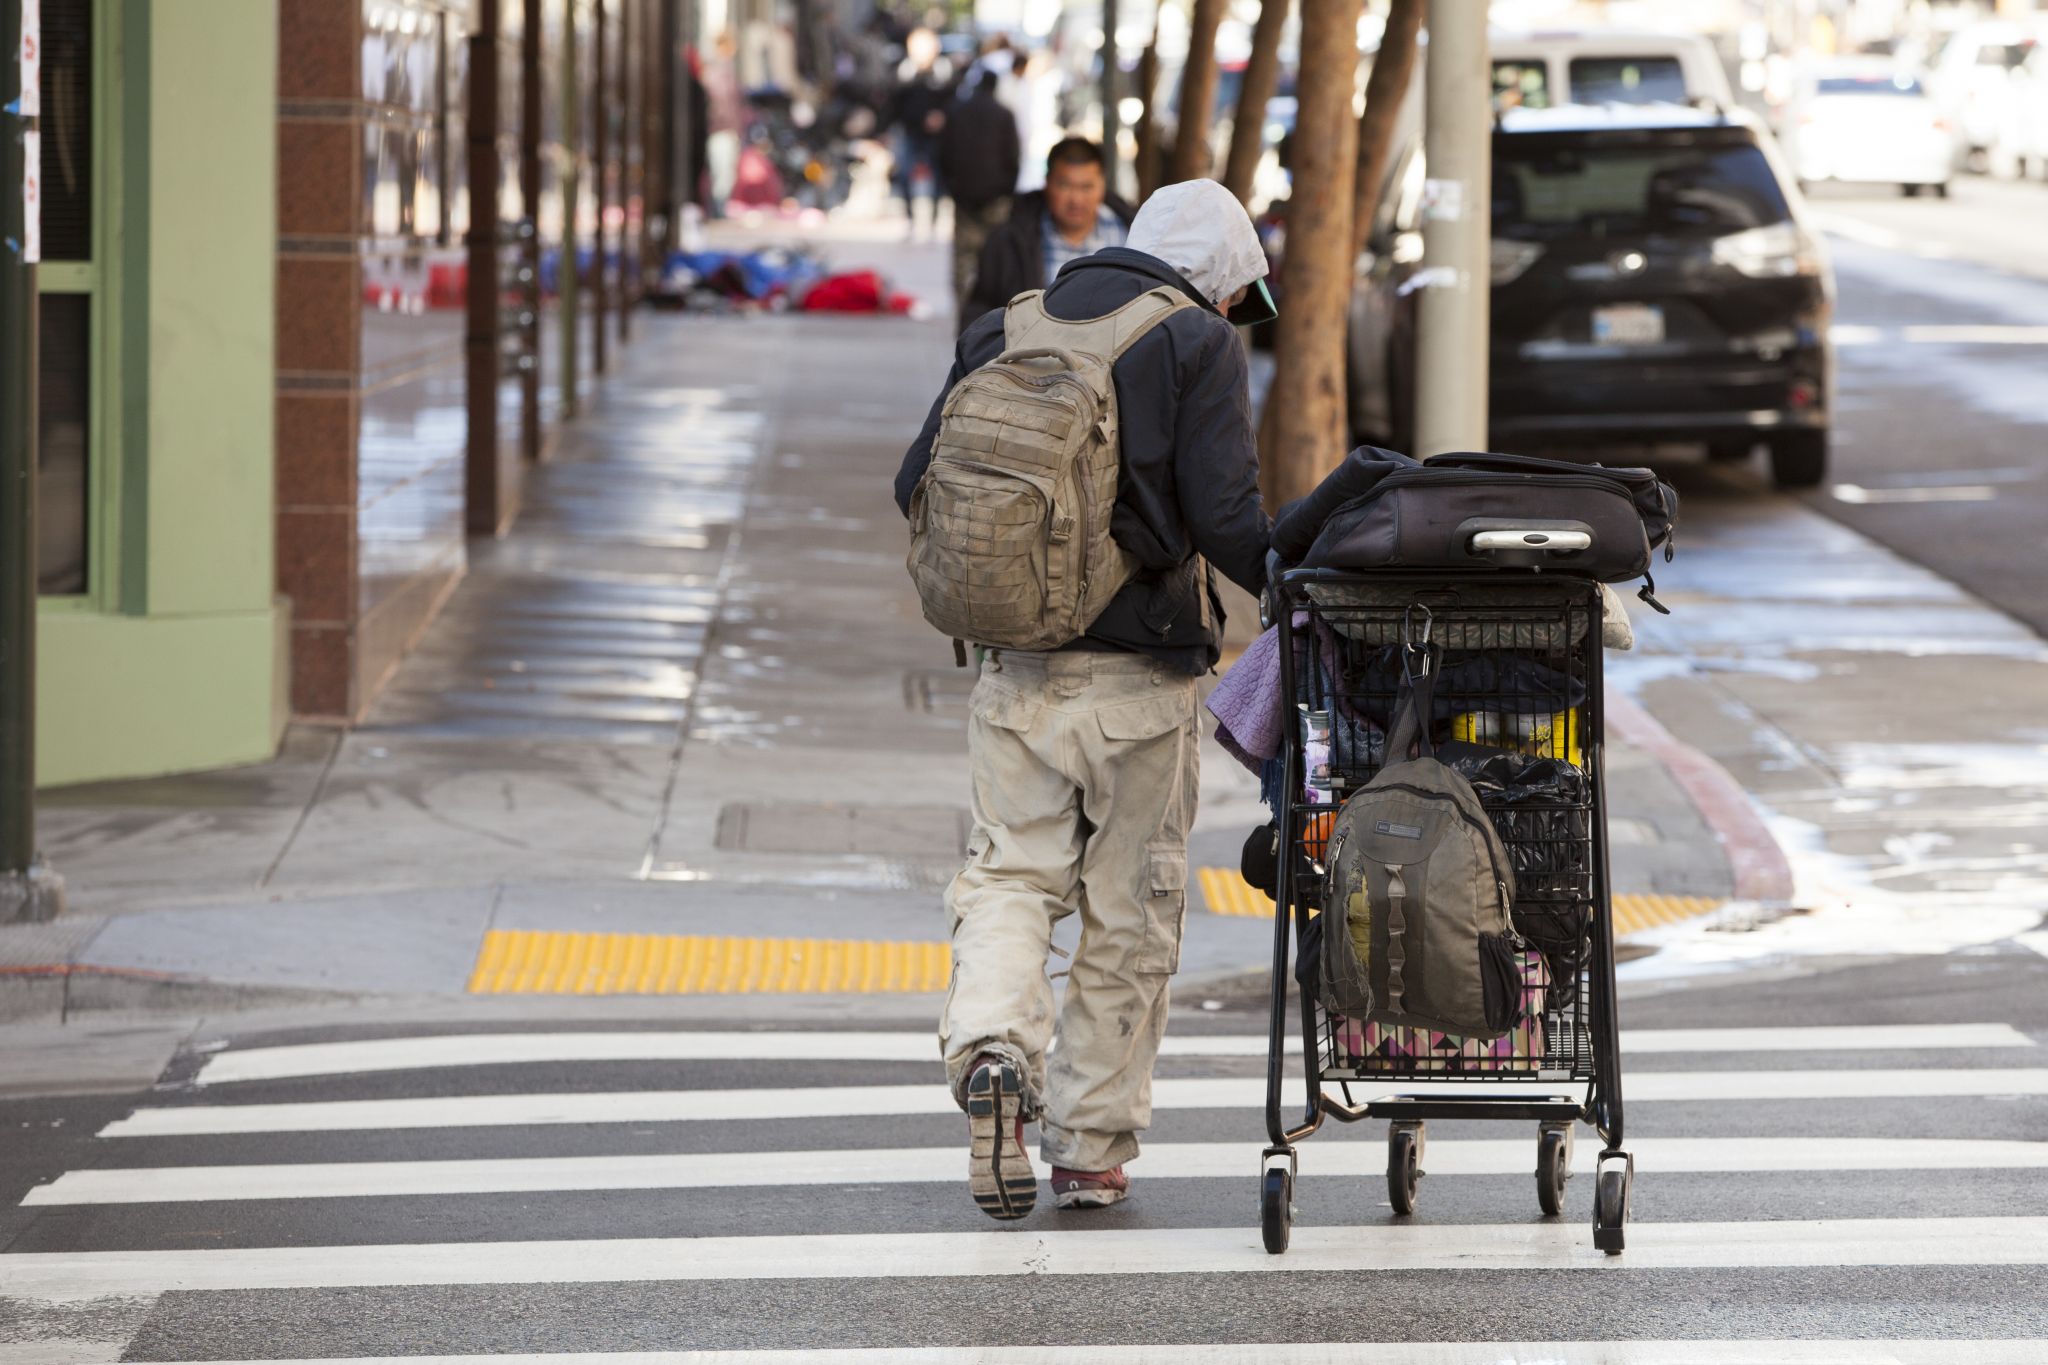 We Asked 12 Homeless People What Happened Their Answers Show We All Are Close To The Streets